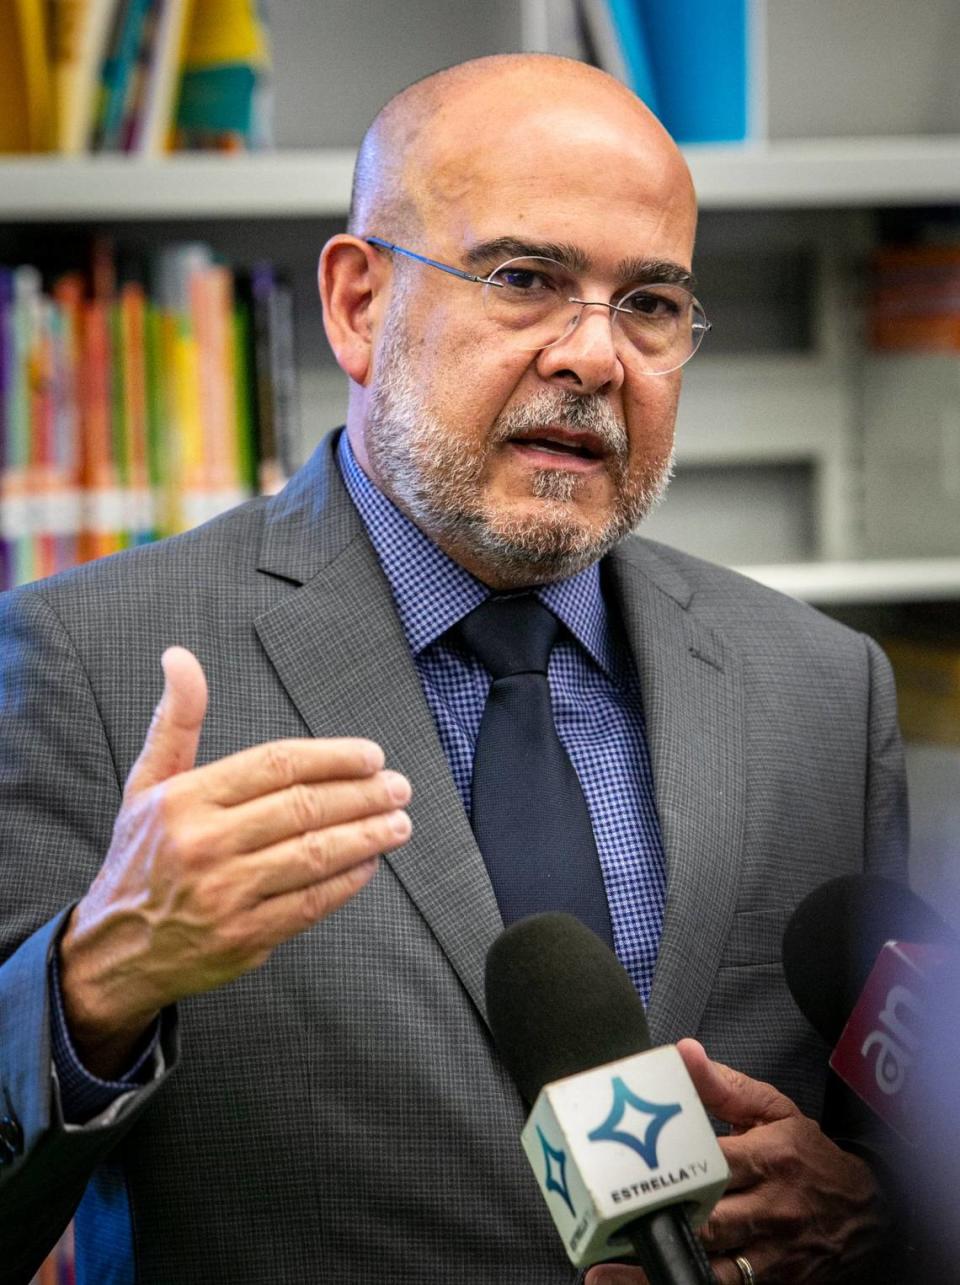 Superintendent José Dotres, pictured on August 17, 2022, the first day of the 2022-23 school year, said the review committee’s decision followed district policy.